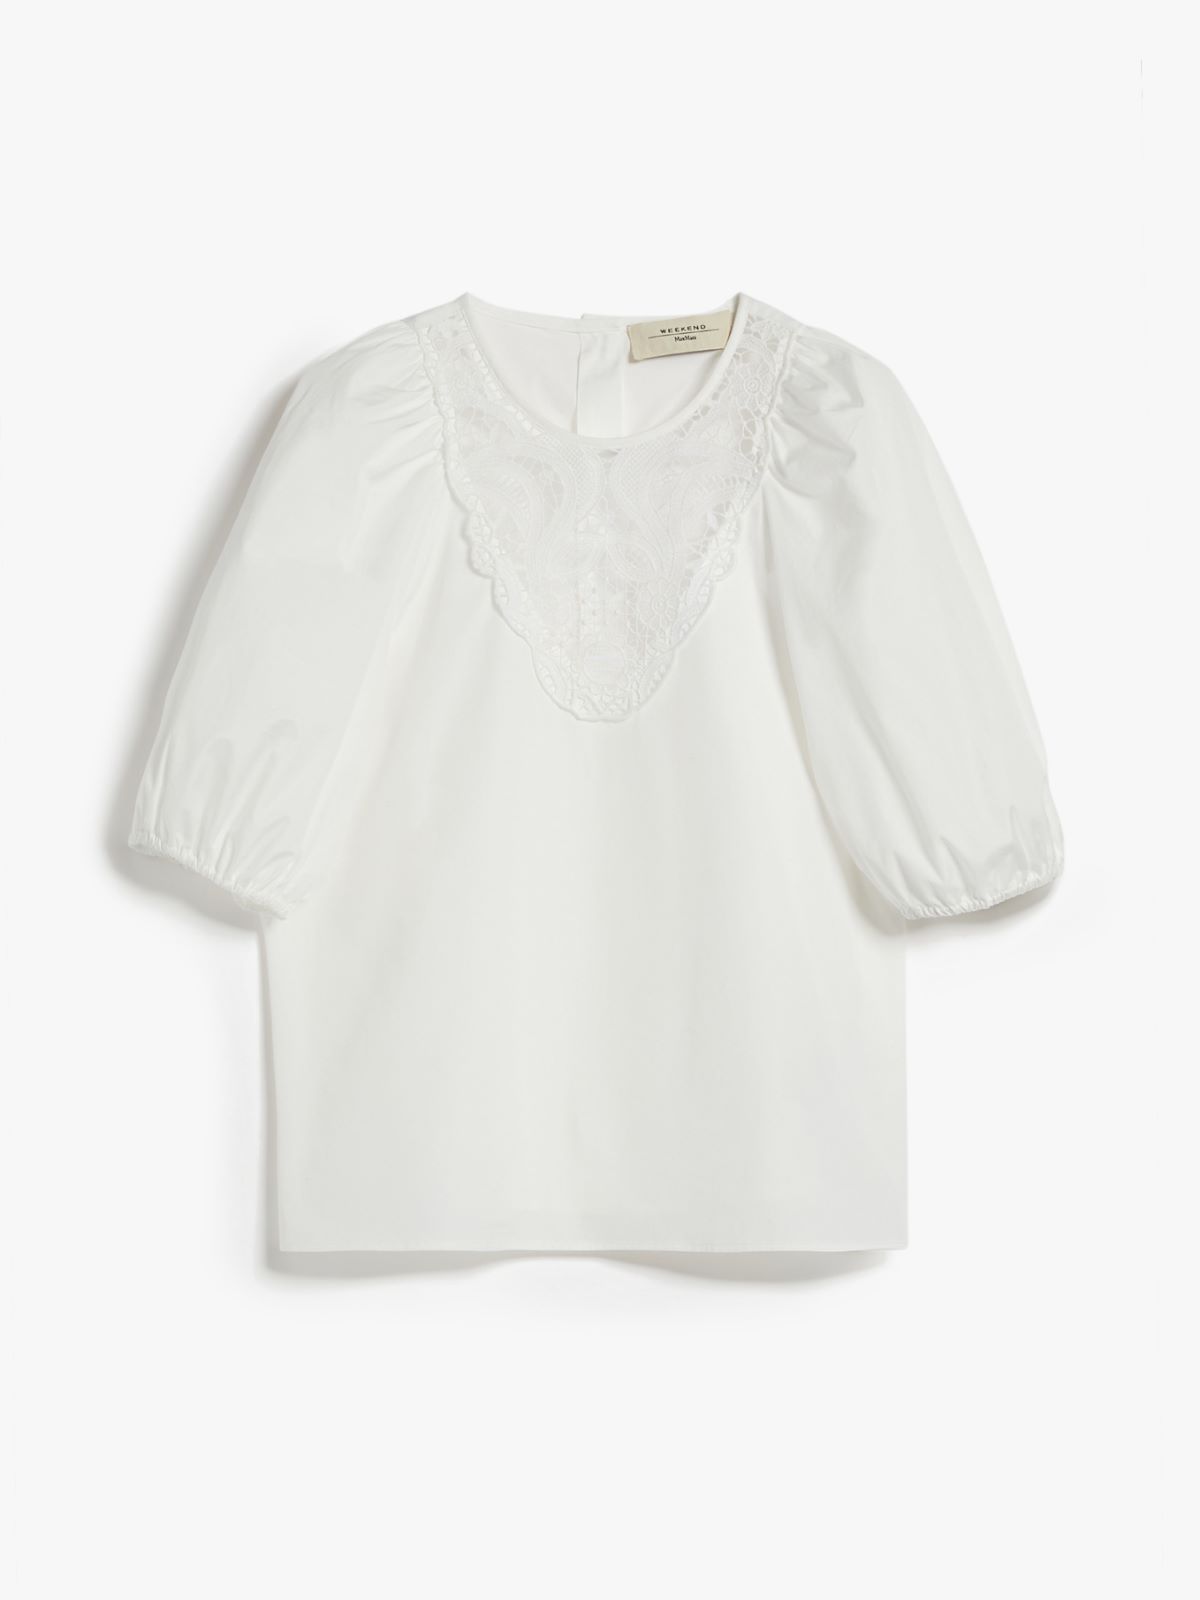 Poplin blouse with embroidery - OPTICAL WHITE - Weekend Max Mara - 7